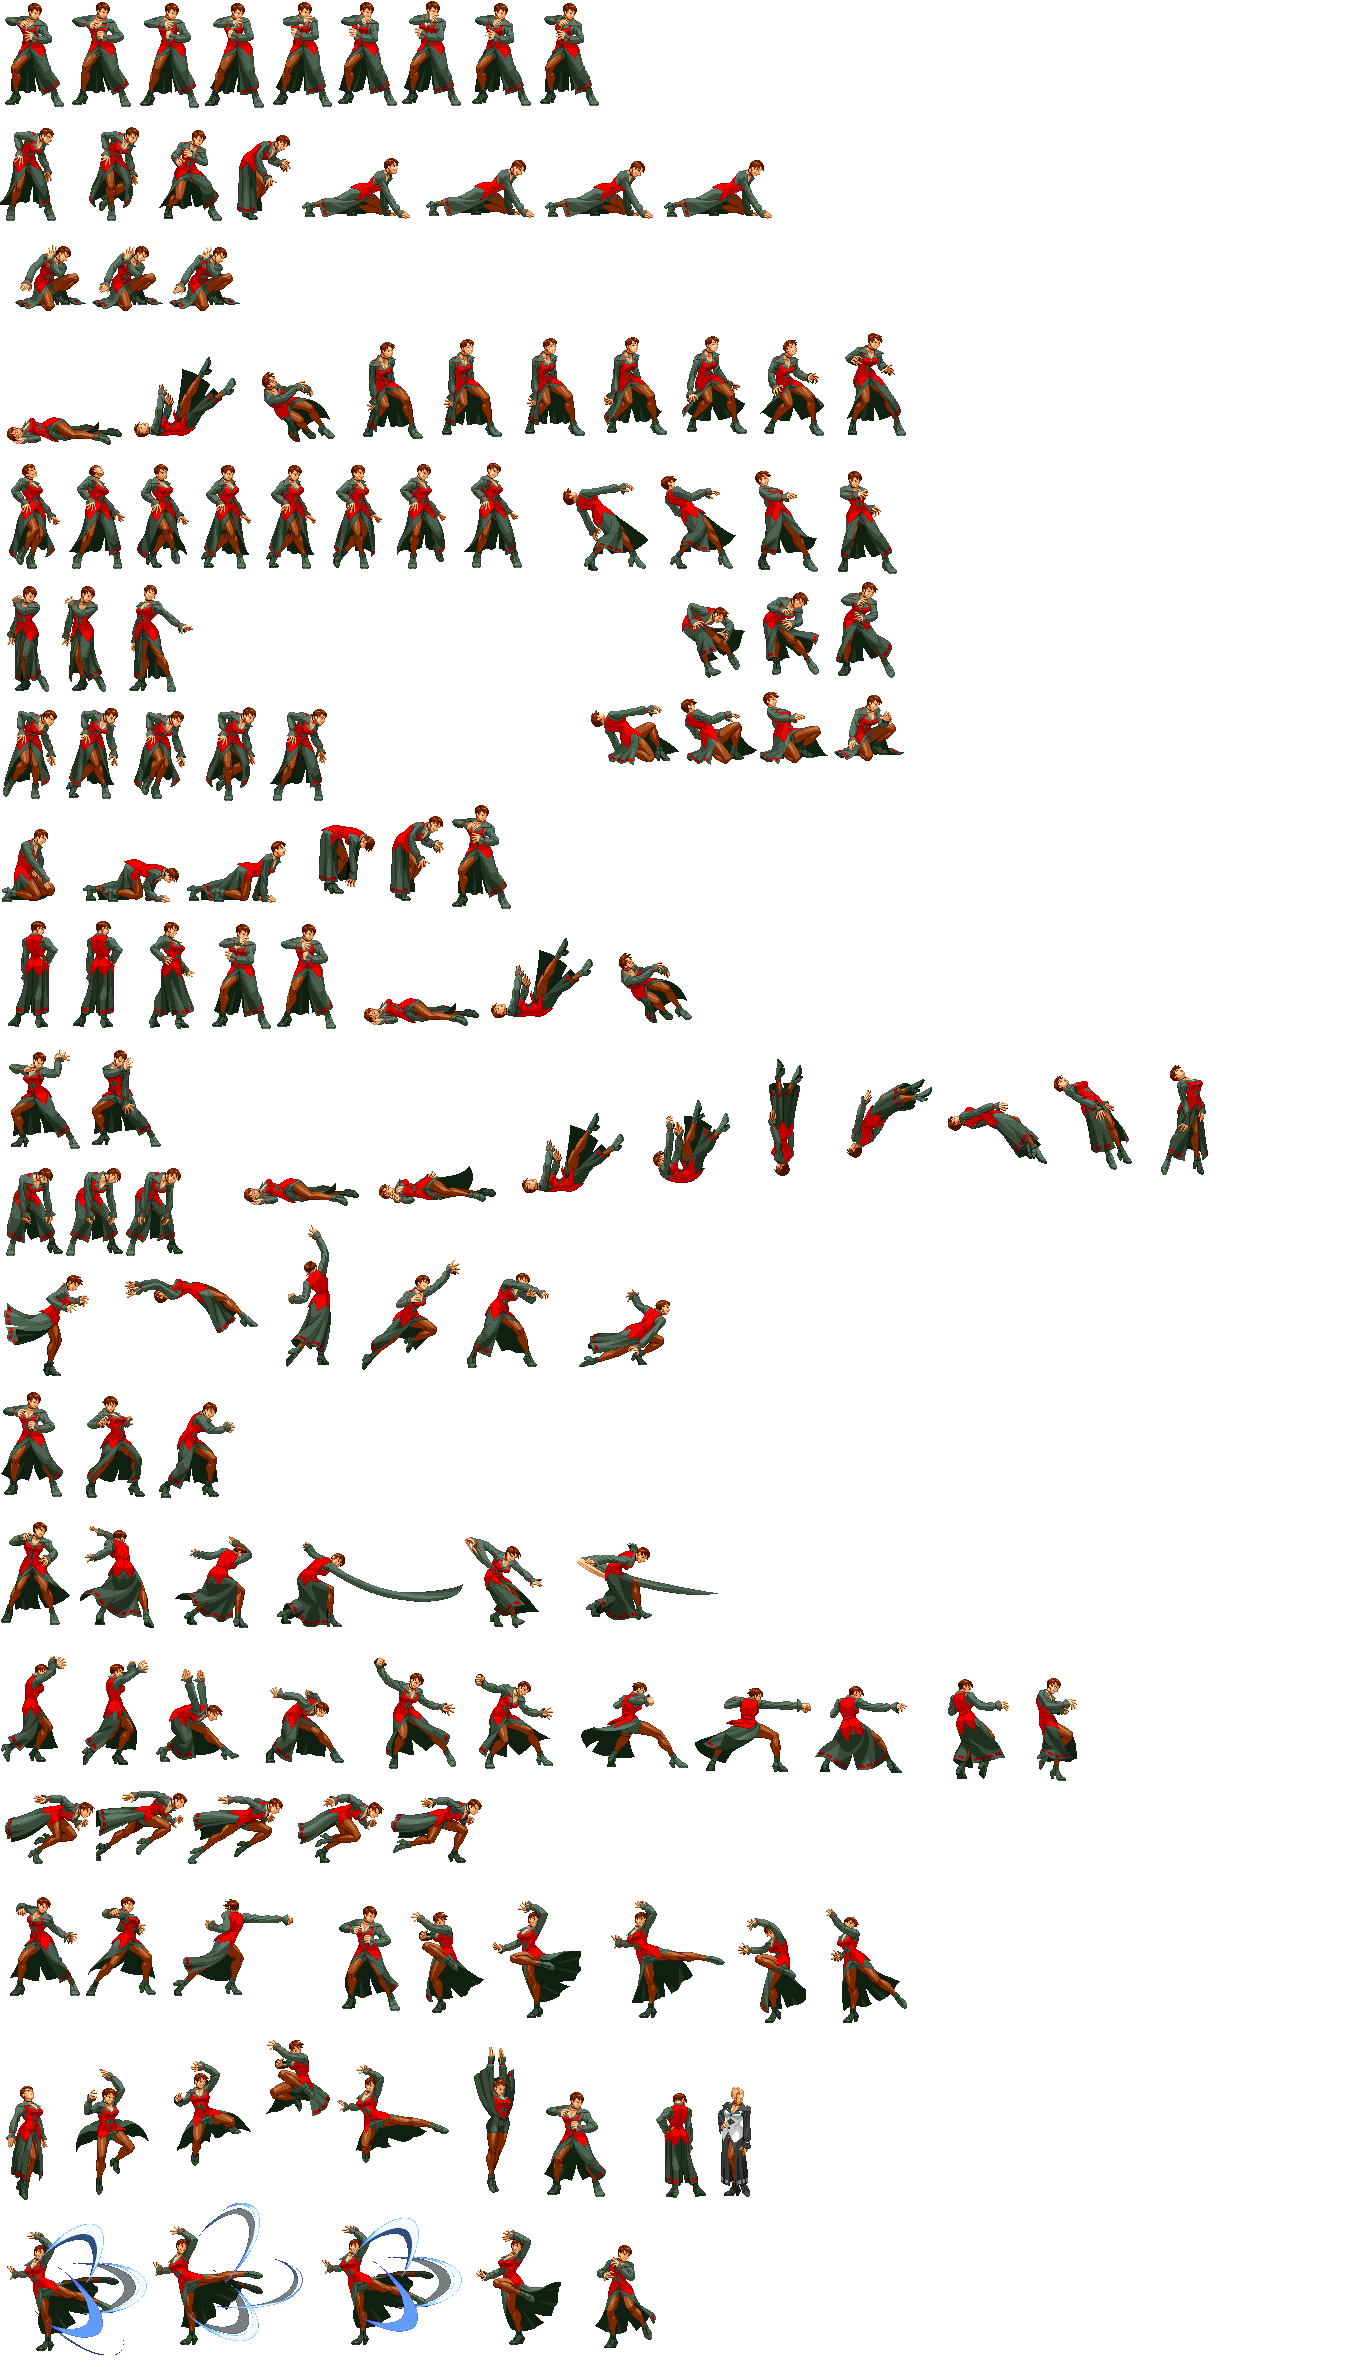 Image - Vice (Anime and Manga) Sprite Sheet.png | Www.dynapaul Wiki ...